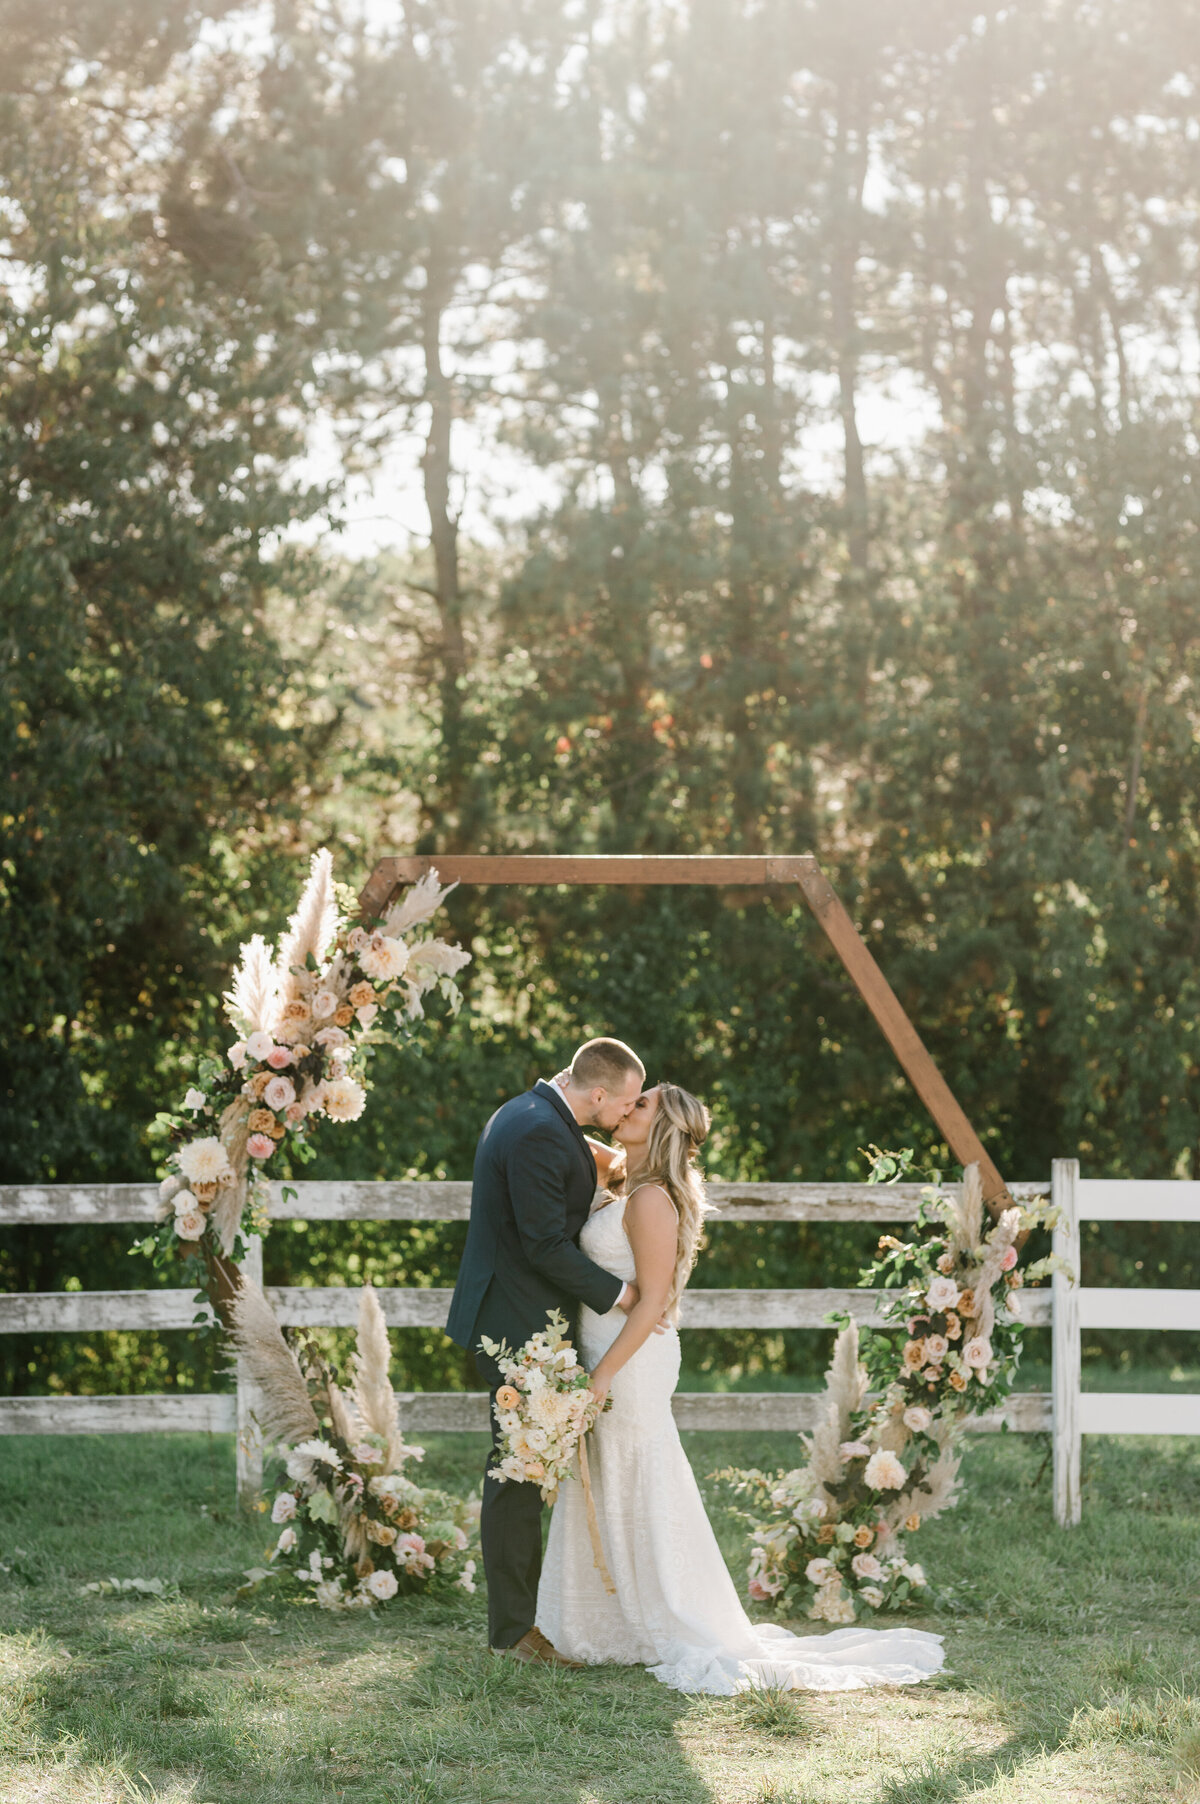 Sarah & Mike, September 19 2020 - Annmarie Swift Photography-83